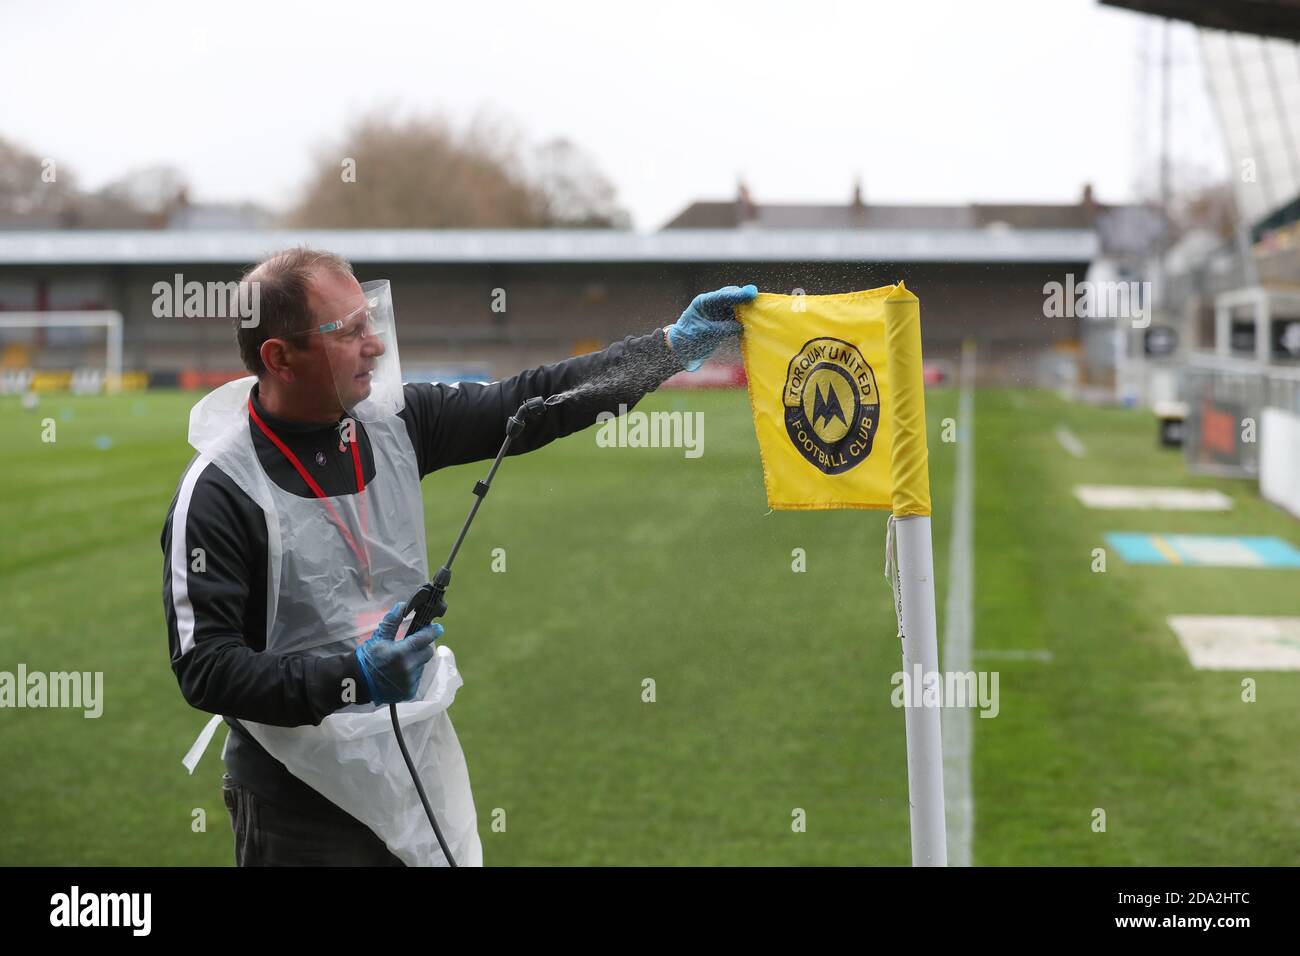 A official wearing PPE sprays the corner flag with disinfectant spray before the First round of the Emirates FA Cup between Torquay United and Crawley Town at Plainmoor, Torquay.  Picture James Boardman / Telephoto Images Stock Photo